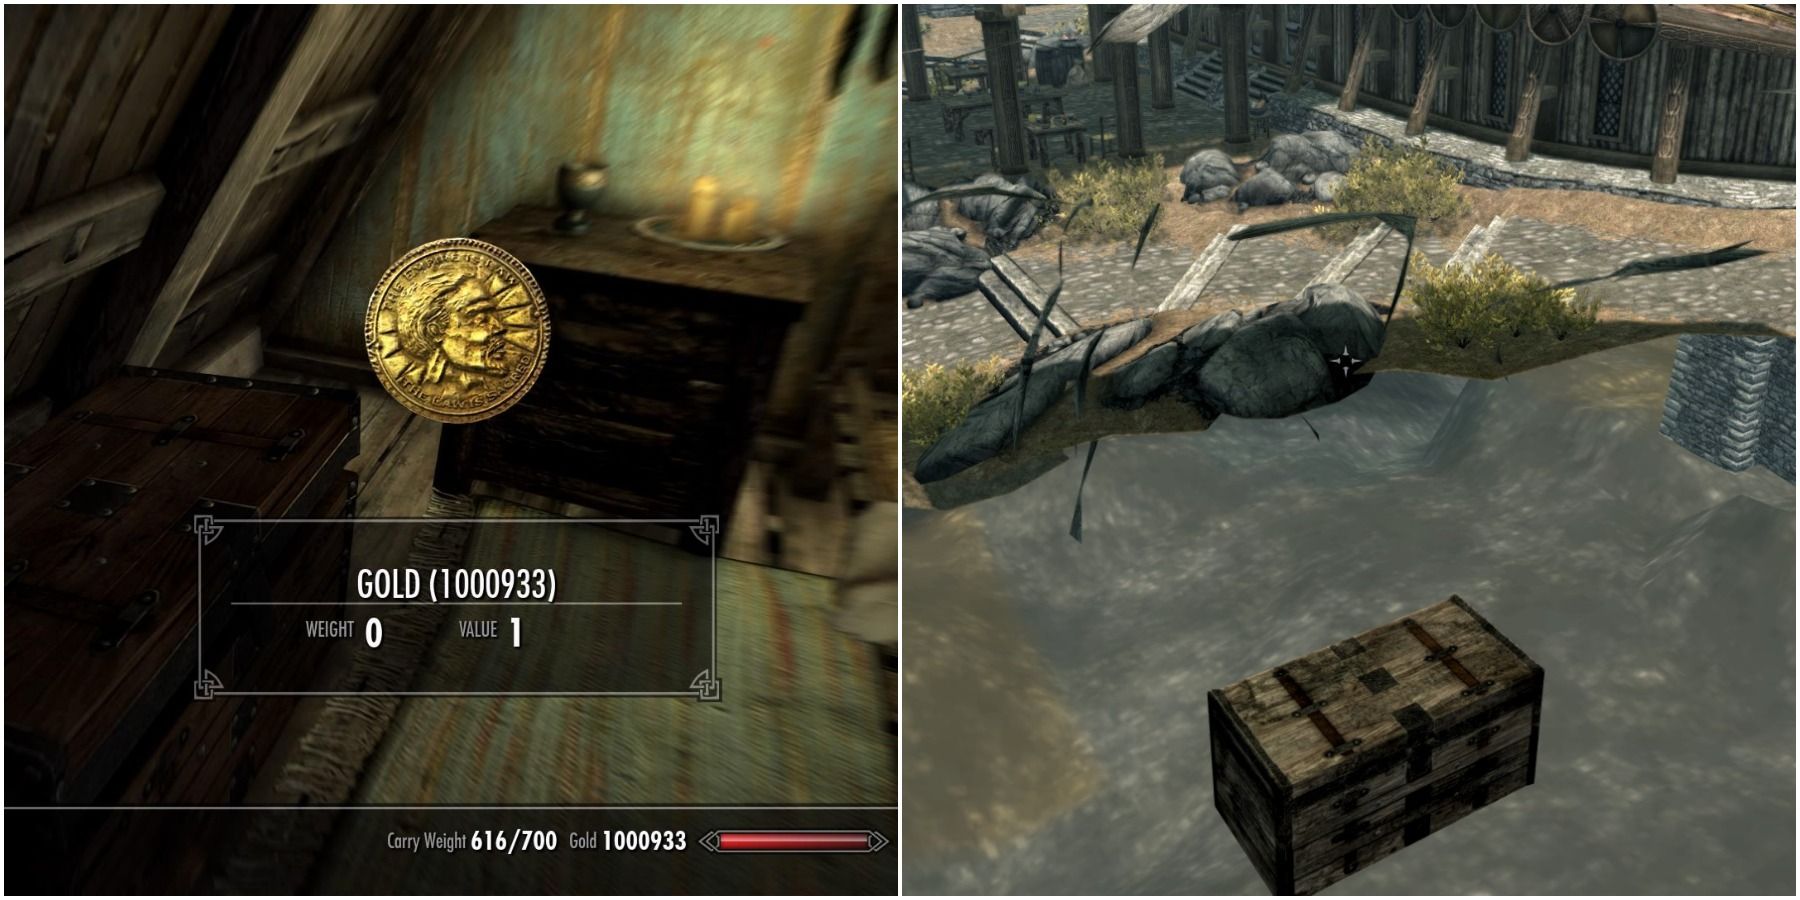 How do you get 1000000 gold in Skyrim ps4?